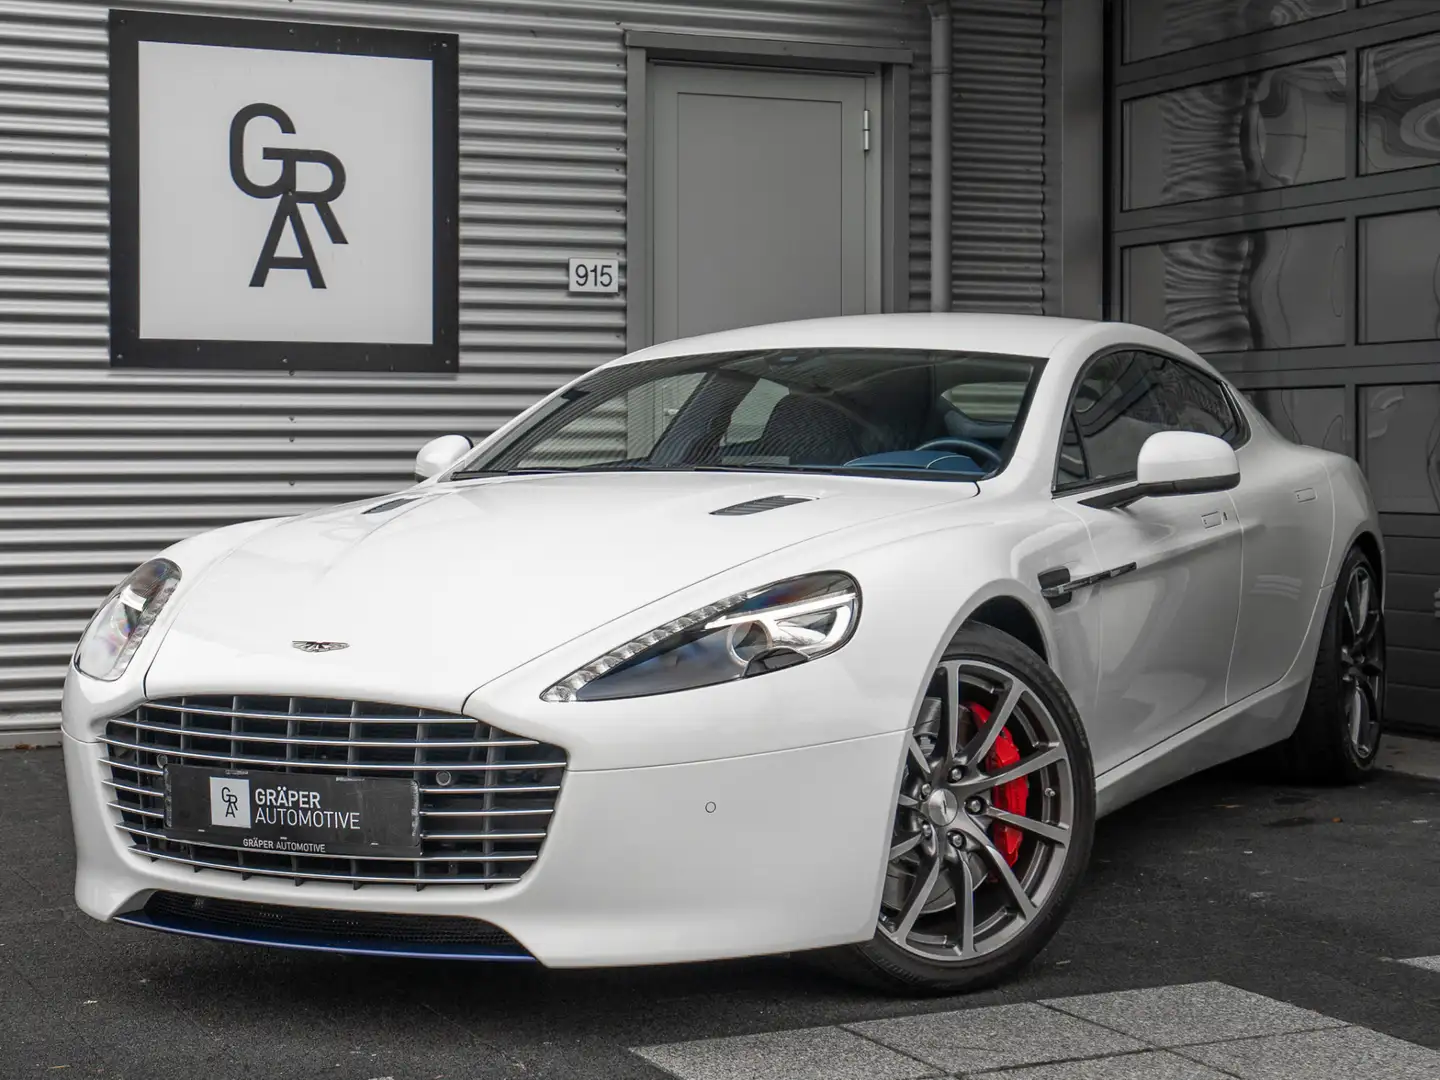 Aston Martin Rapide S 6.0 V12 ‘Britain is Great’ Edition by Q 1/8 Alb - 1